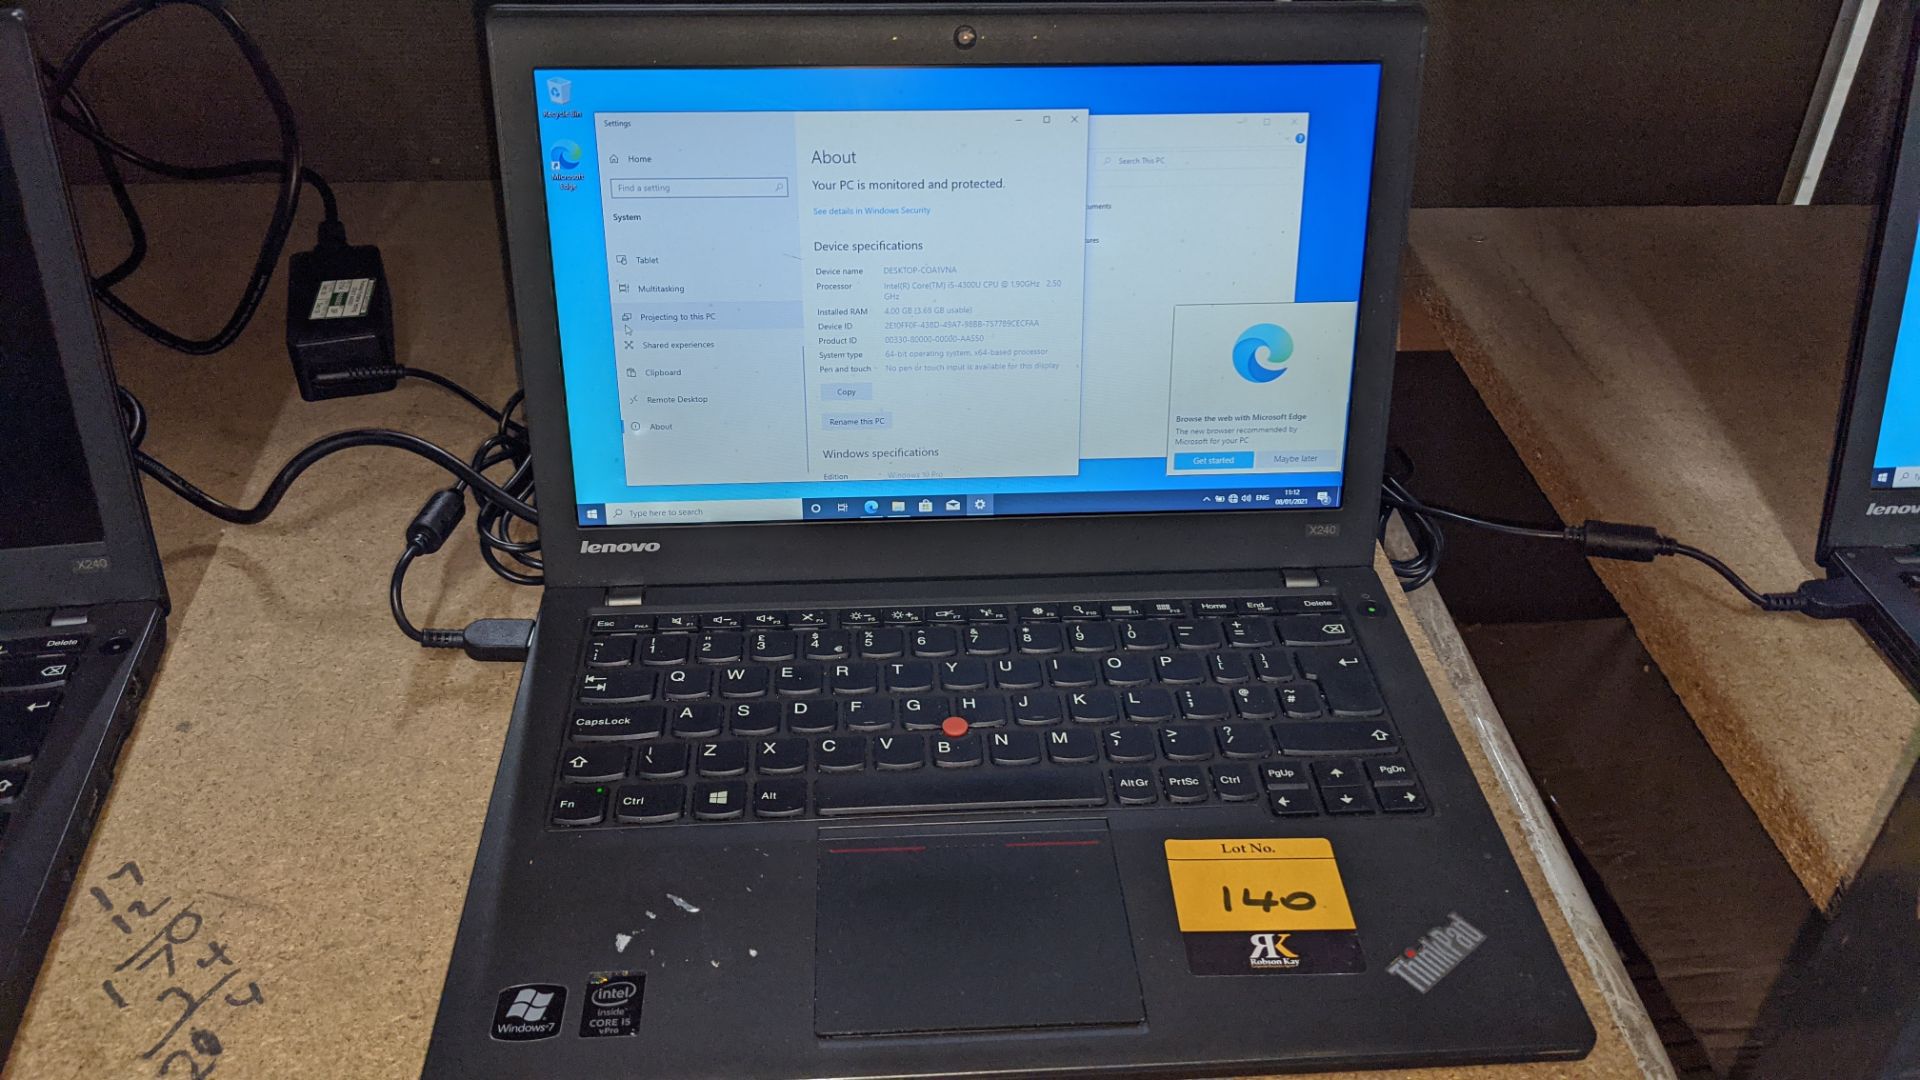 Lenovo notebook ThinkPad X240, i5-4300U (1.90GHz), 4GB, 500GB, 12.5", includes charger - Image 2 of 8